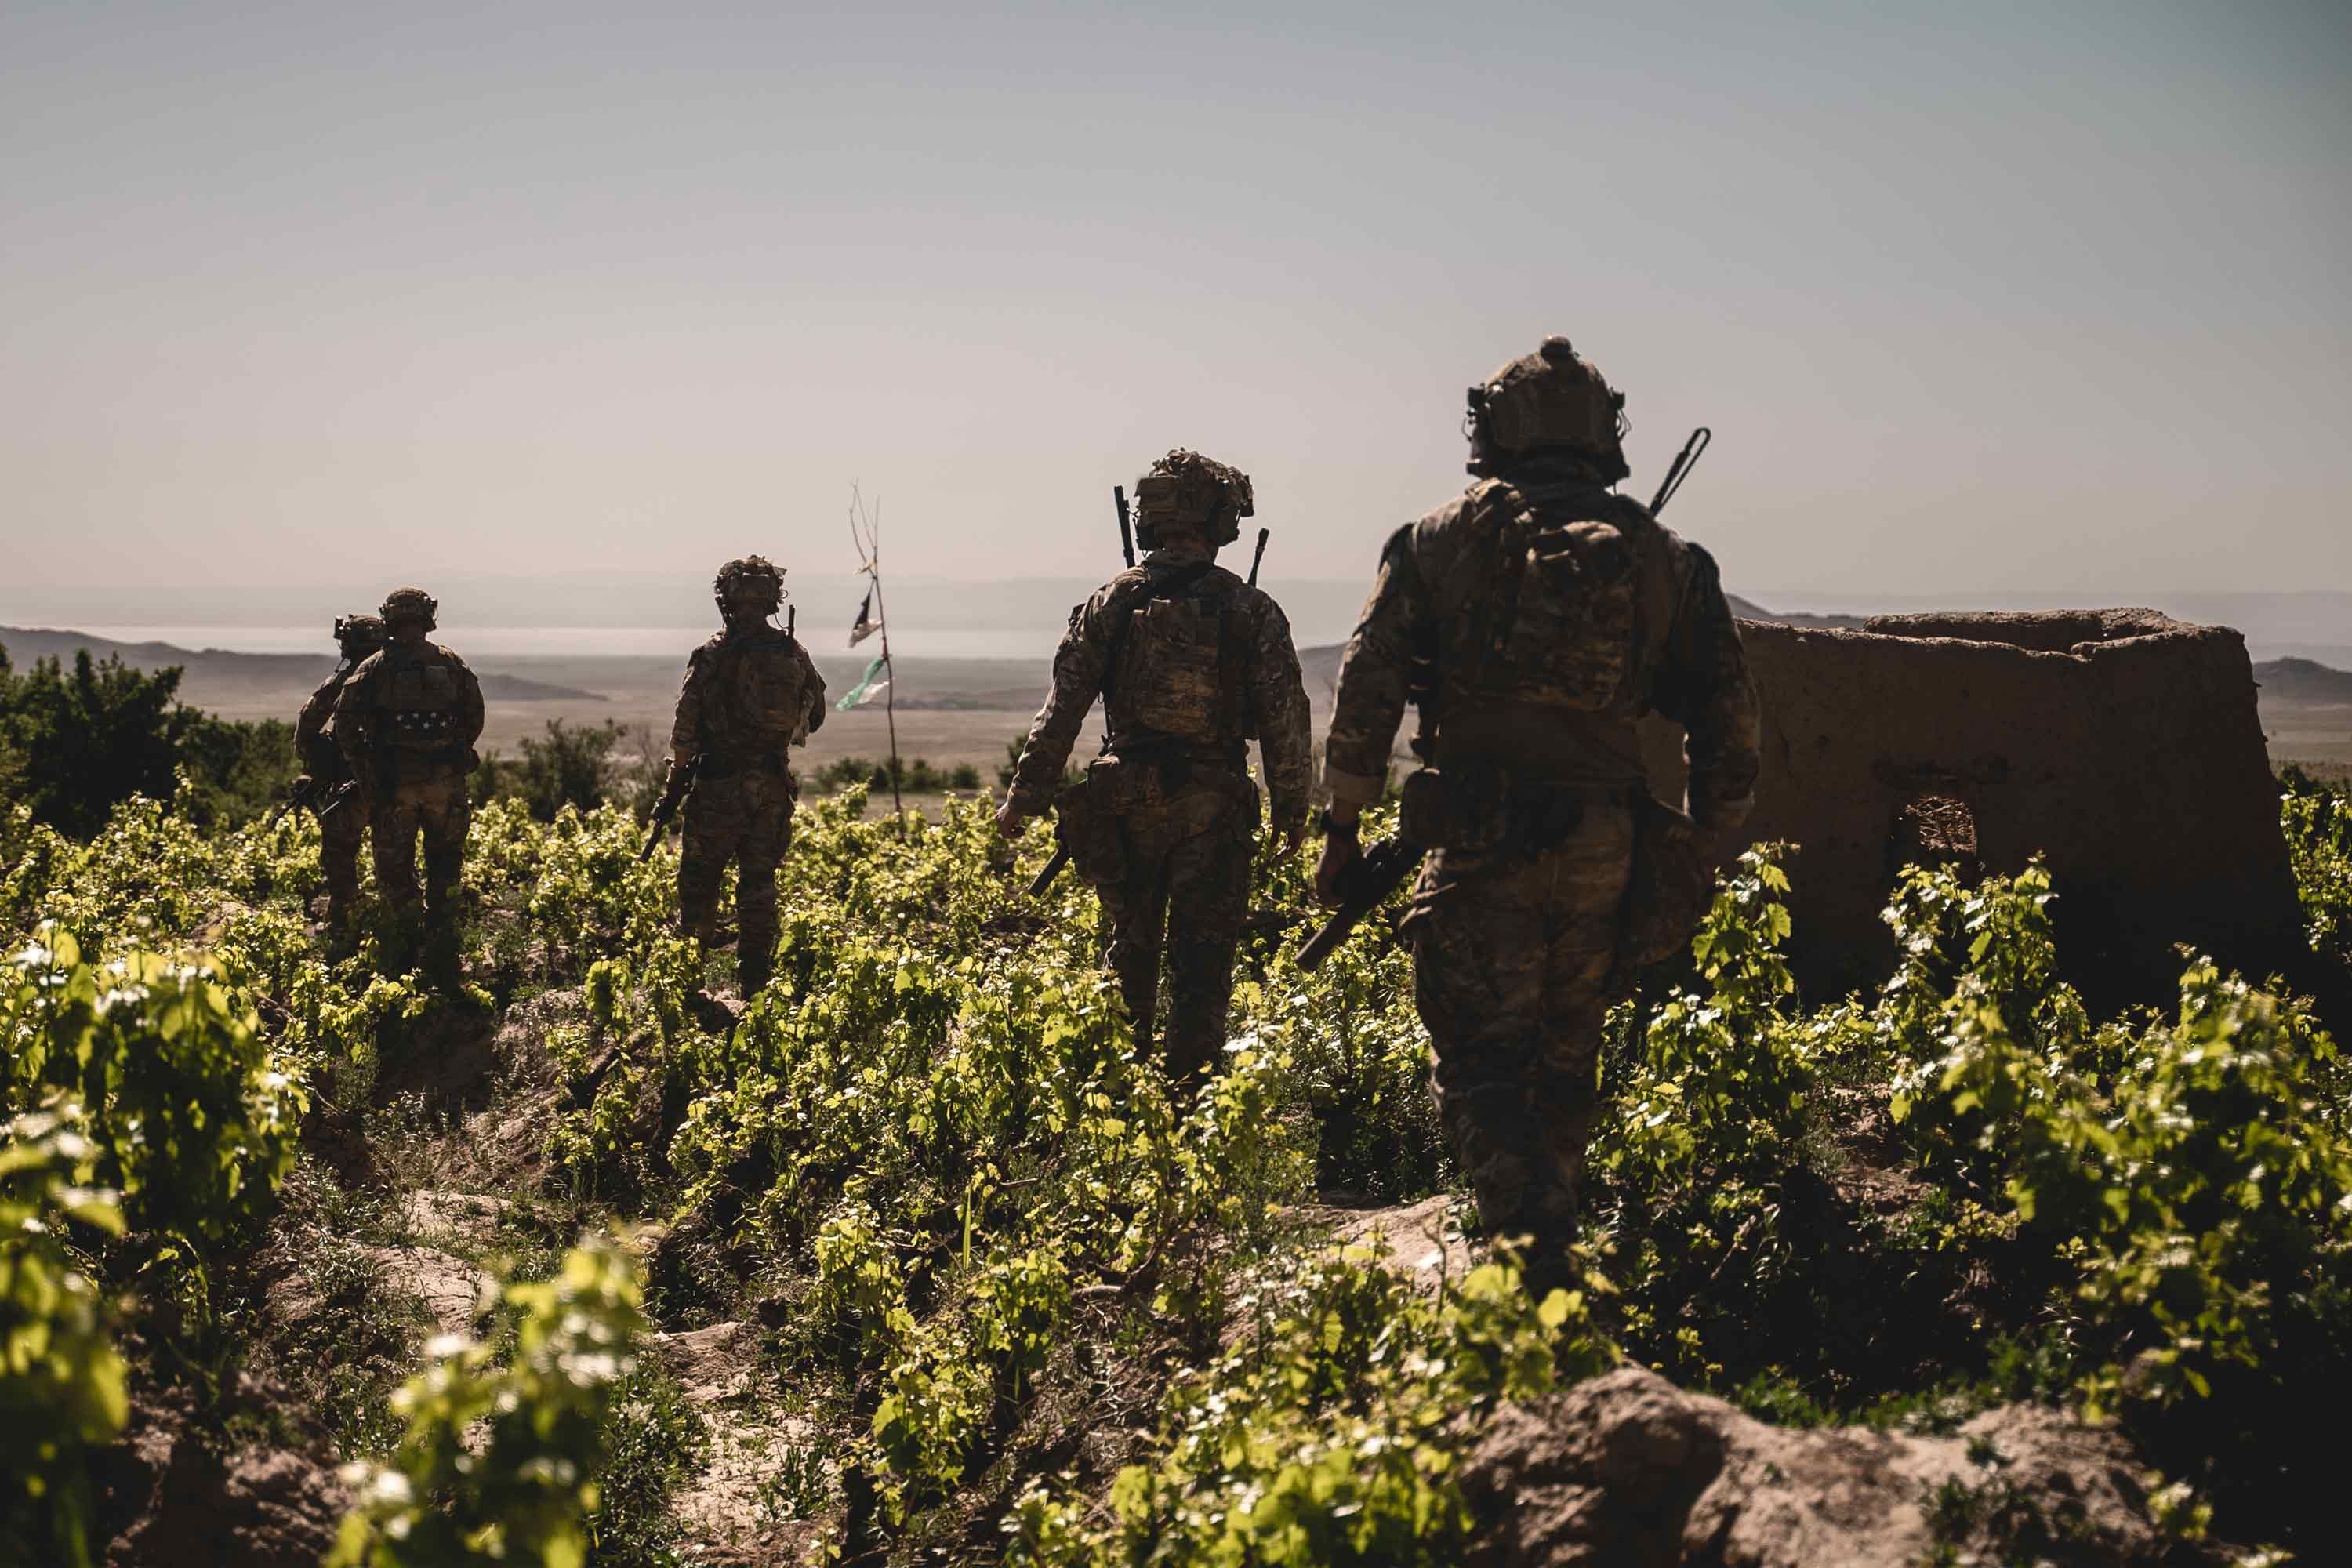 U.S. special operations service members conduct combat operations in support of Operation Resolute Support in Southeast Afghanistan, May 2019. Image by U.S. Army/Sgt. Jaerett Engeseth. Afghanistan, 2019.